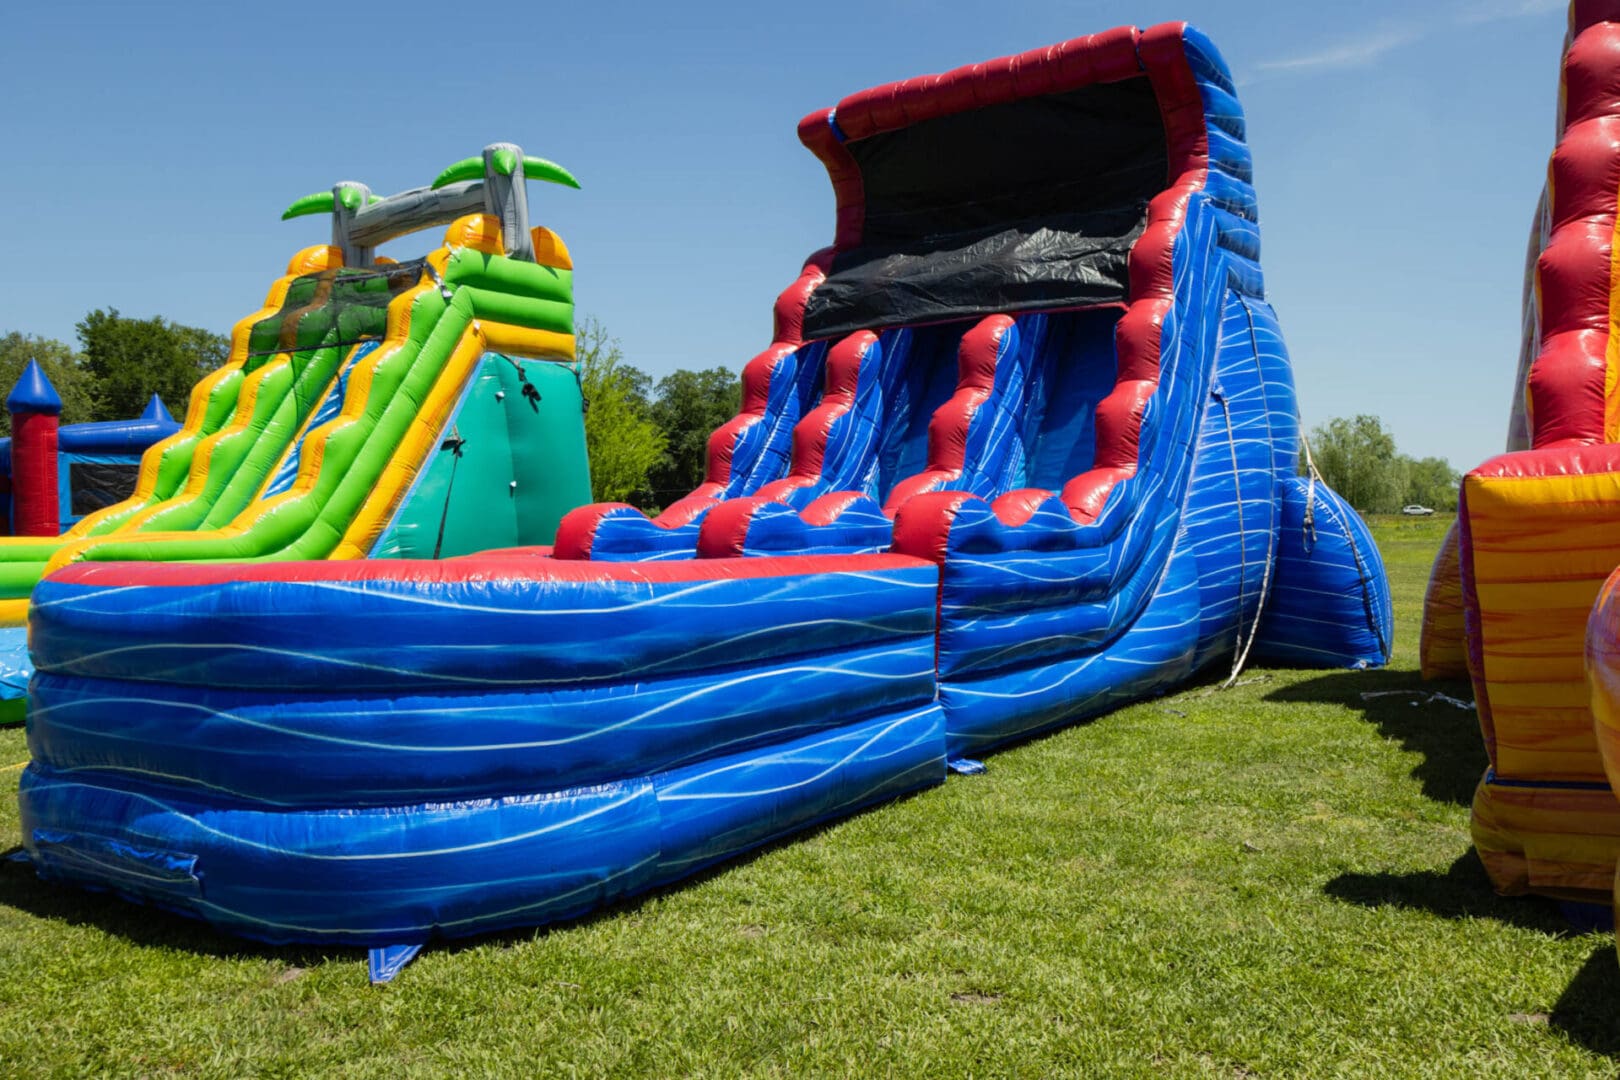 A blue and red inflatable slide on grass.